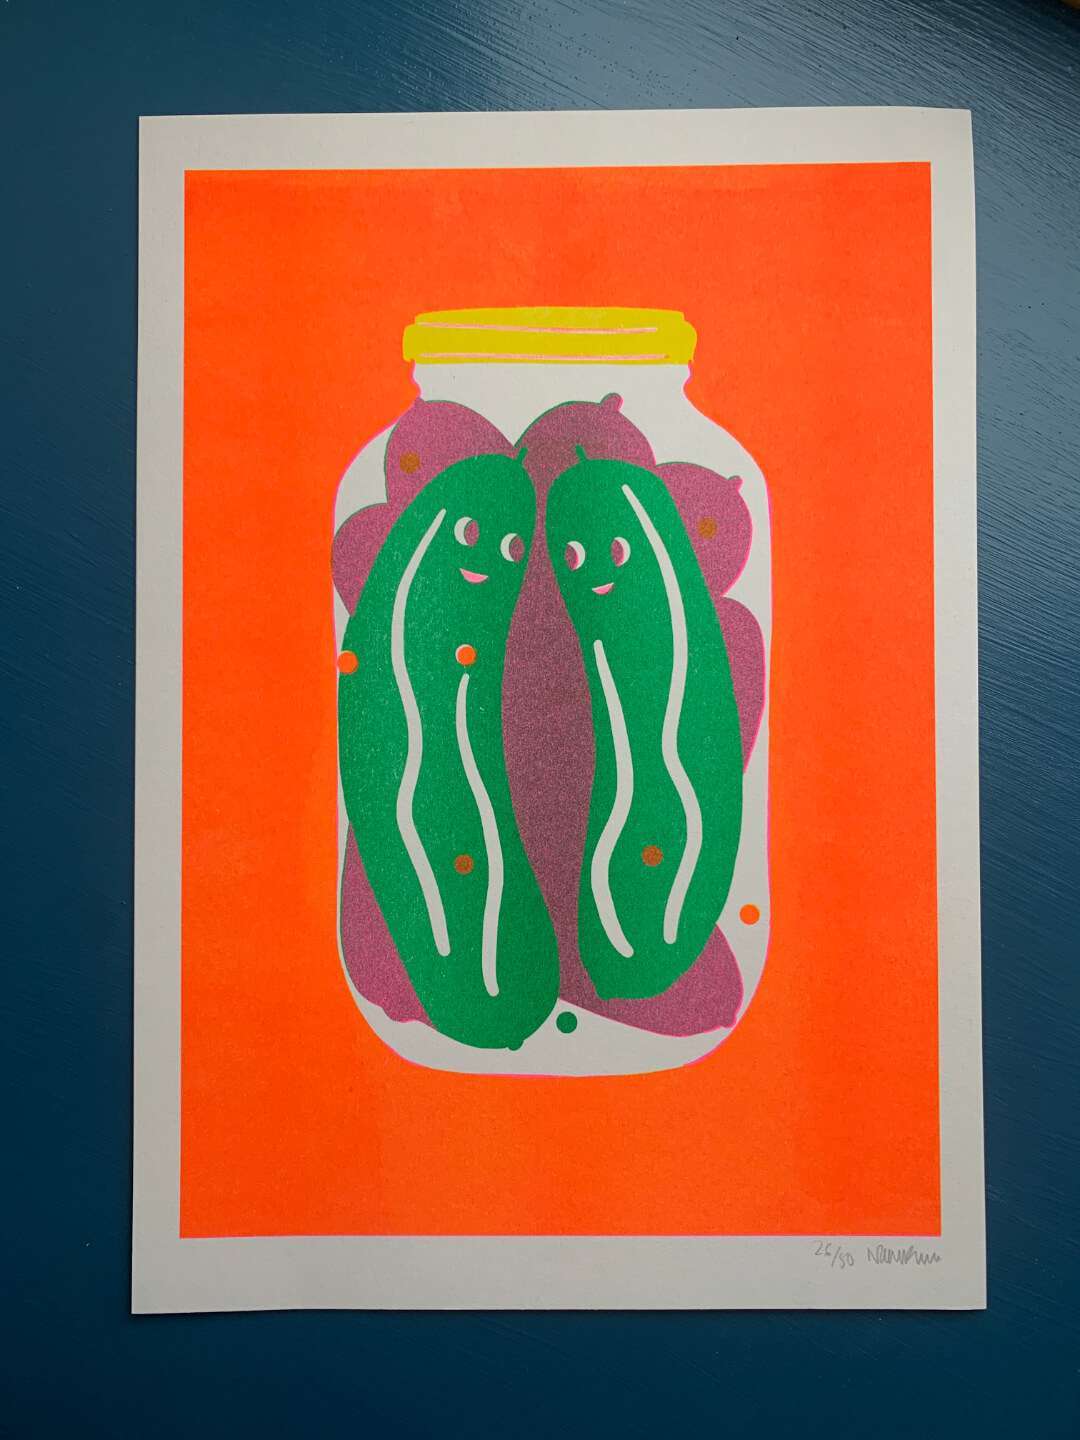 Two Pickles A4 Riso Print